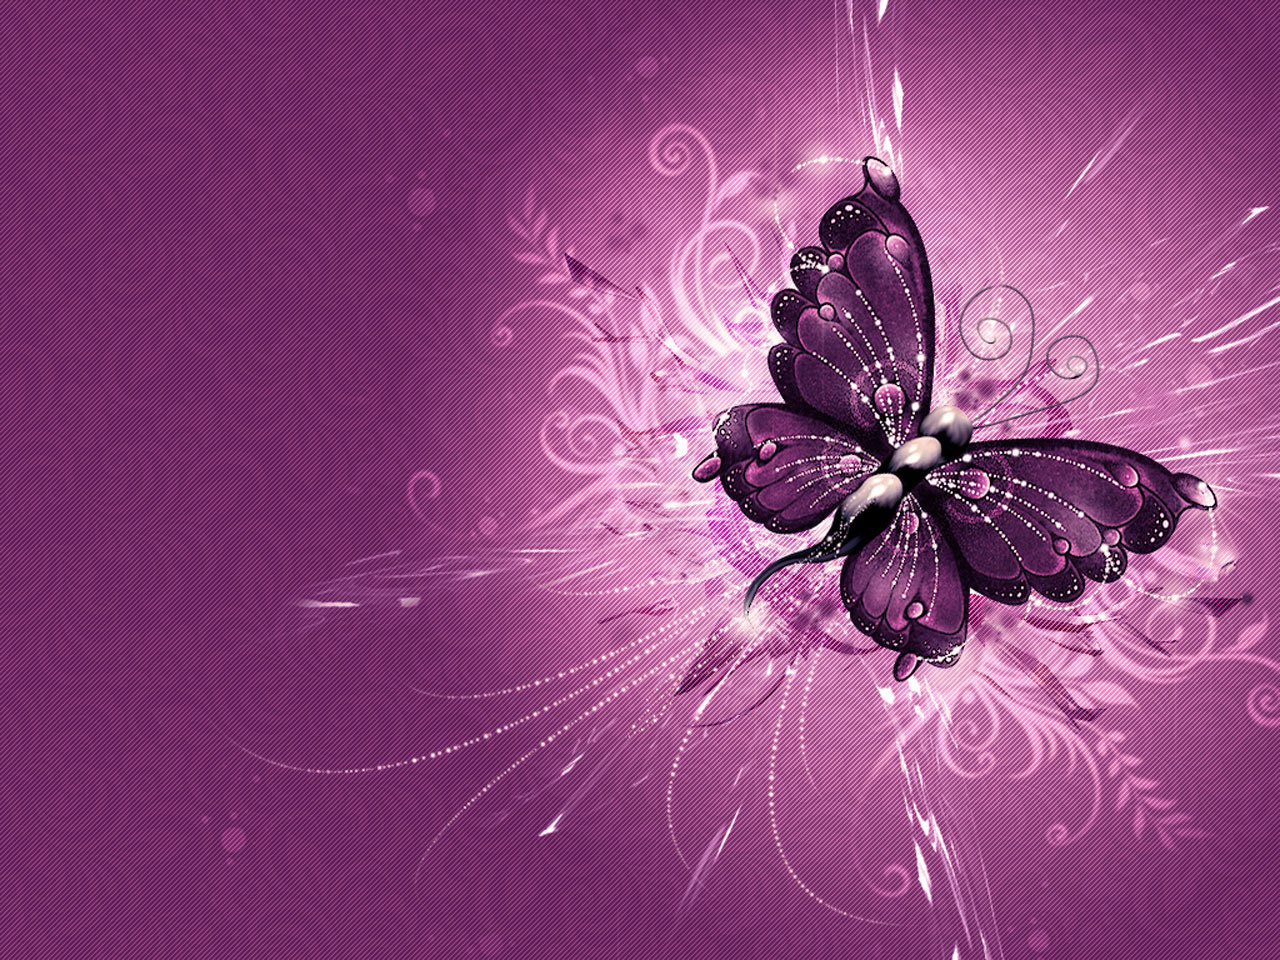 Download Wallpaper Purple in high resolution for Get Wallpaper 1280x960